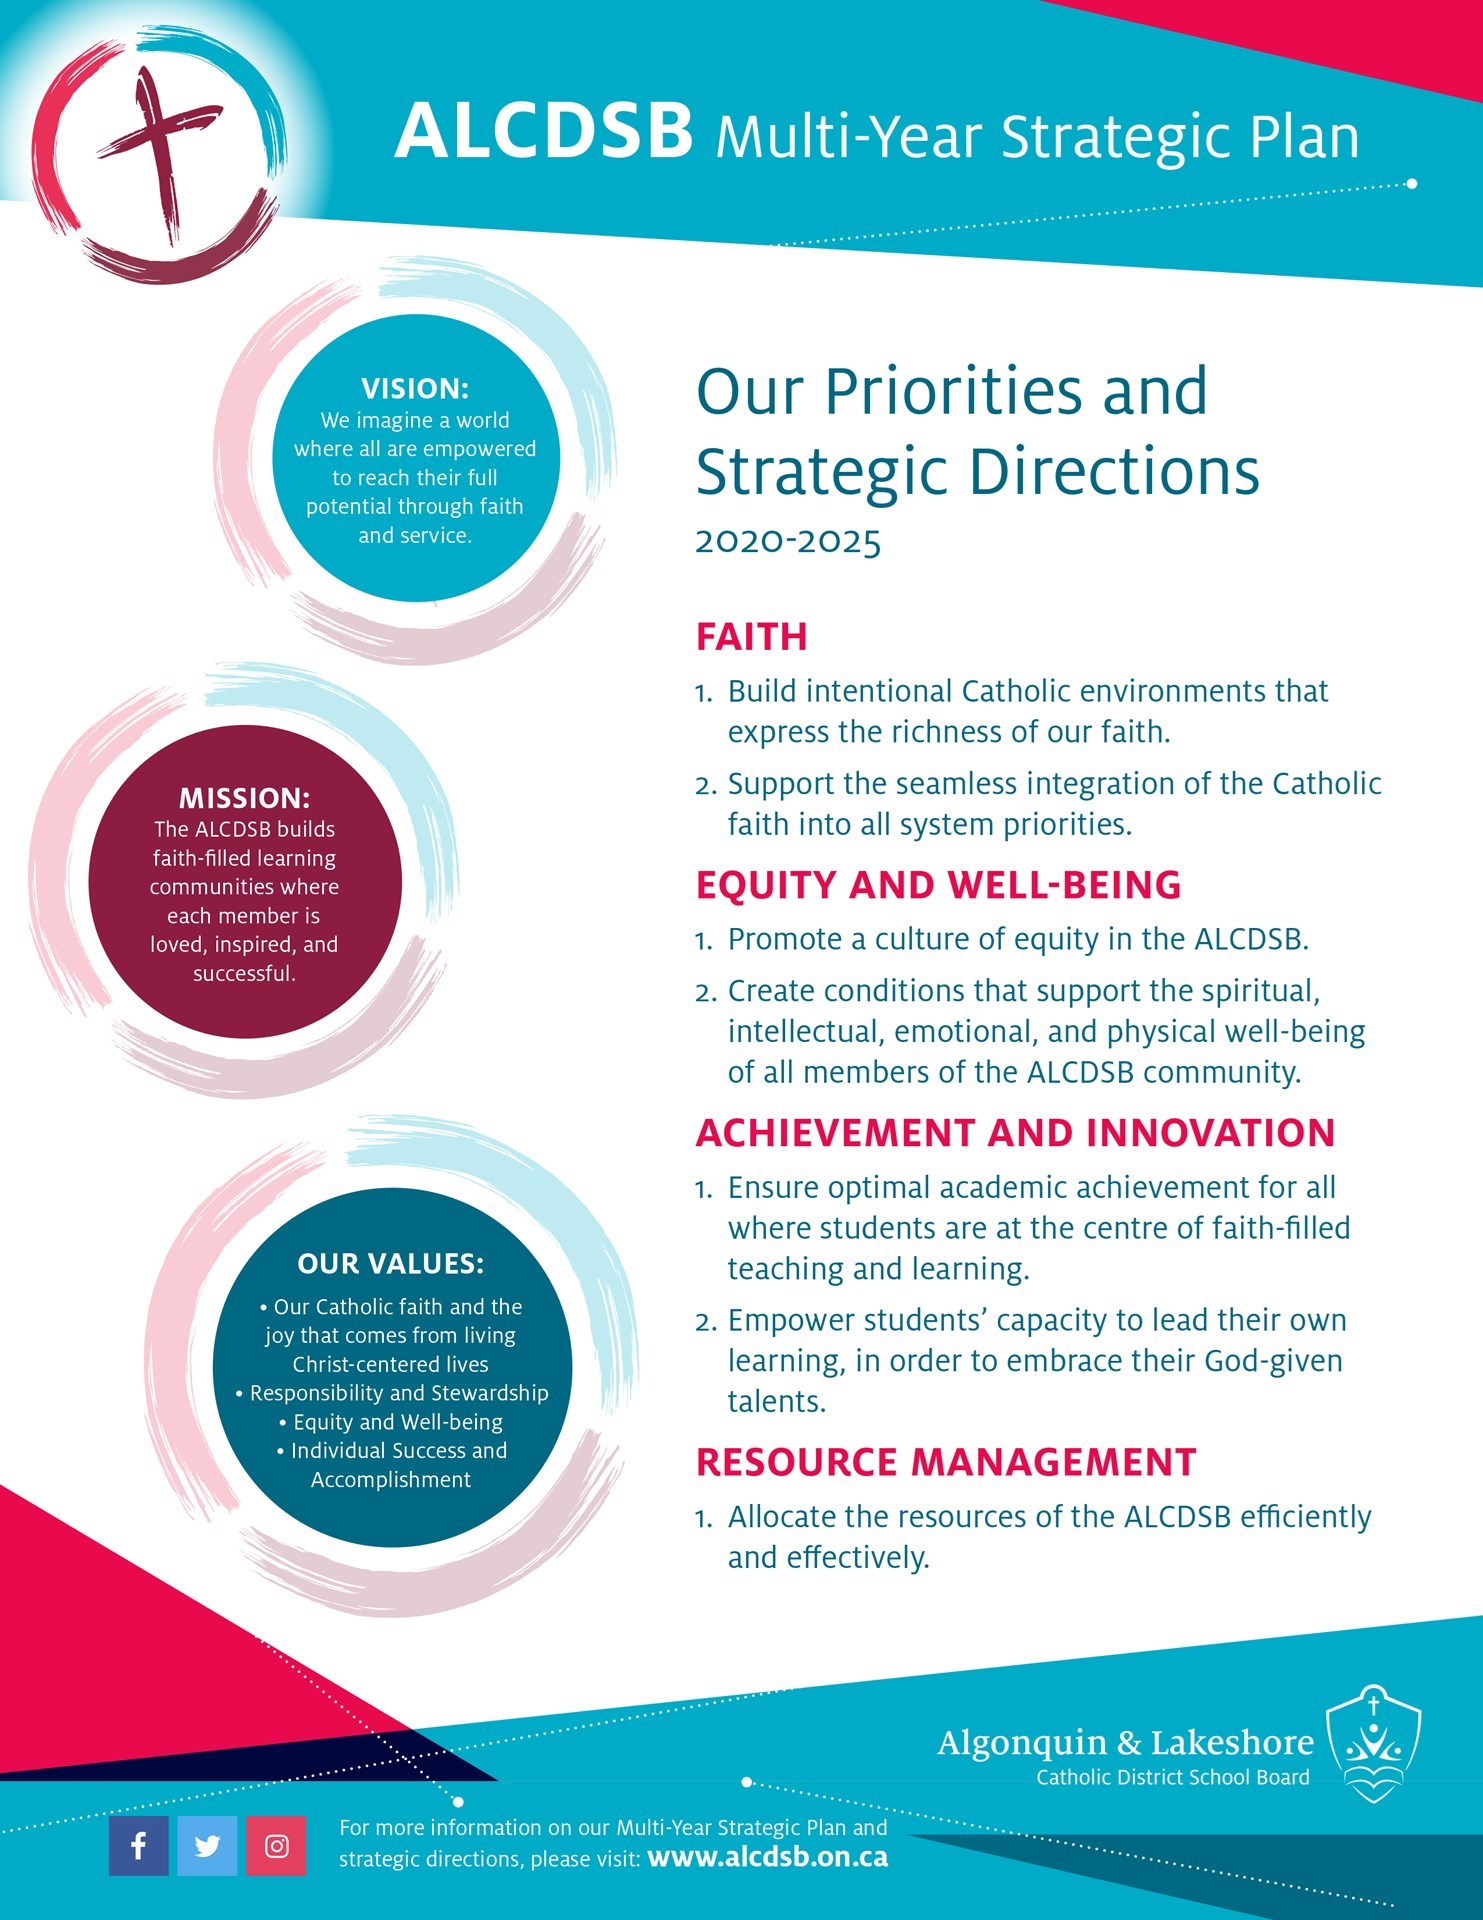 One page overview of the Multi-Year Strategic Plan